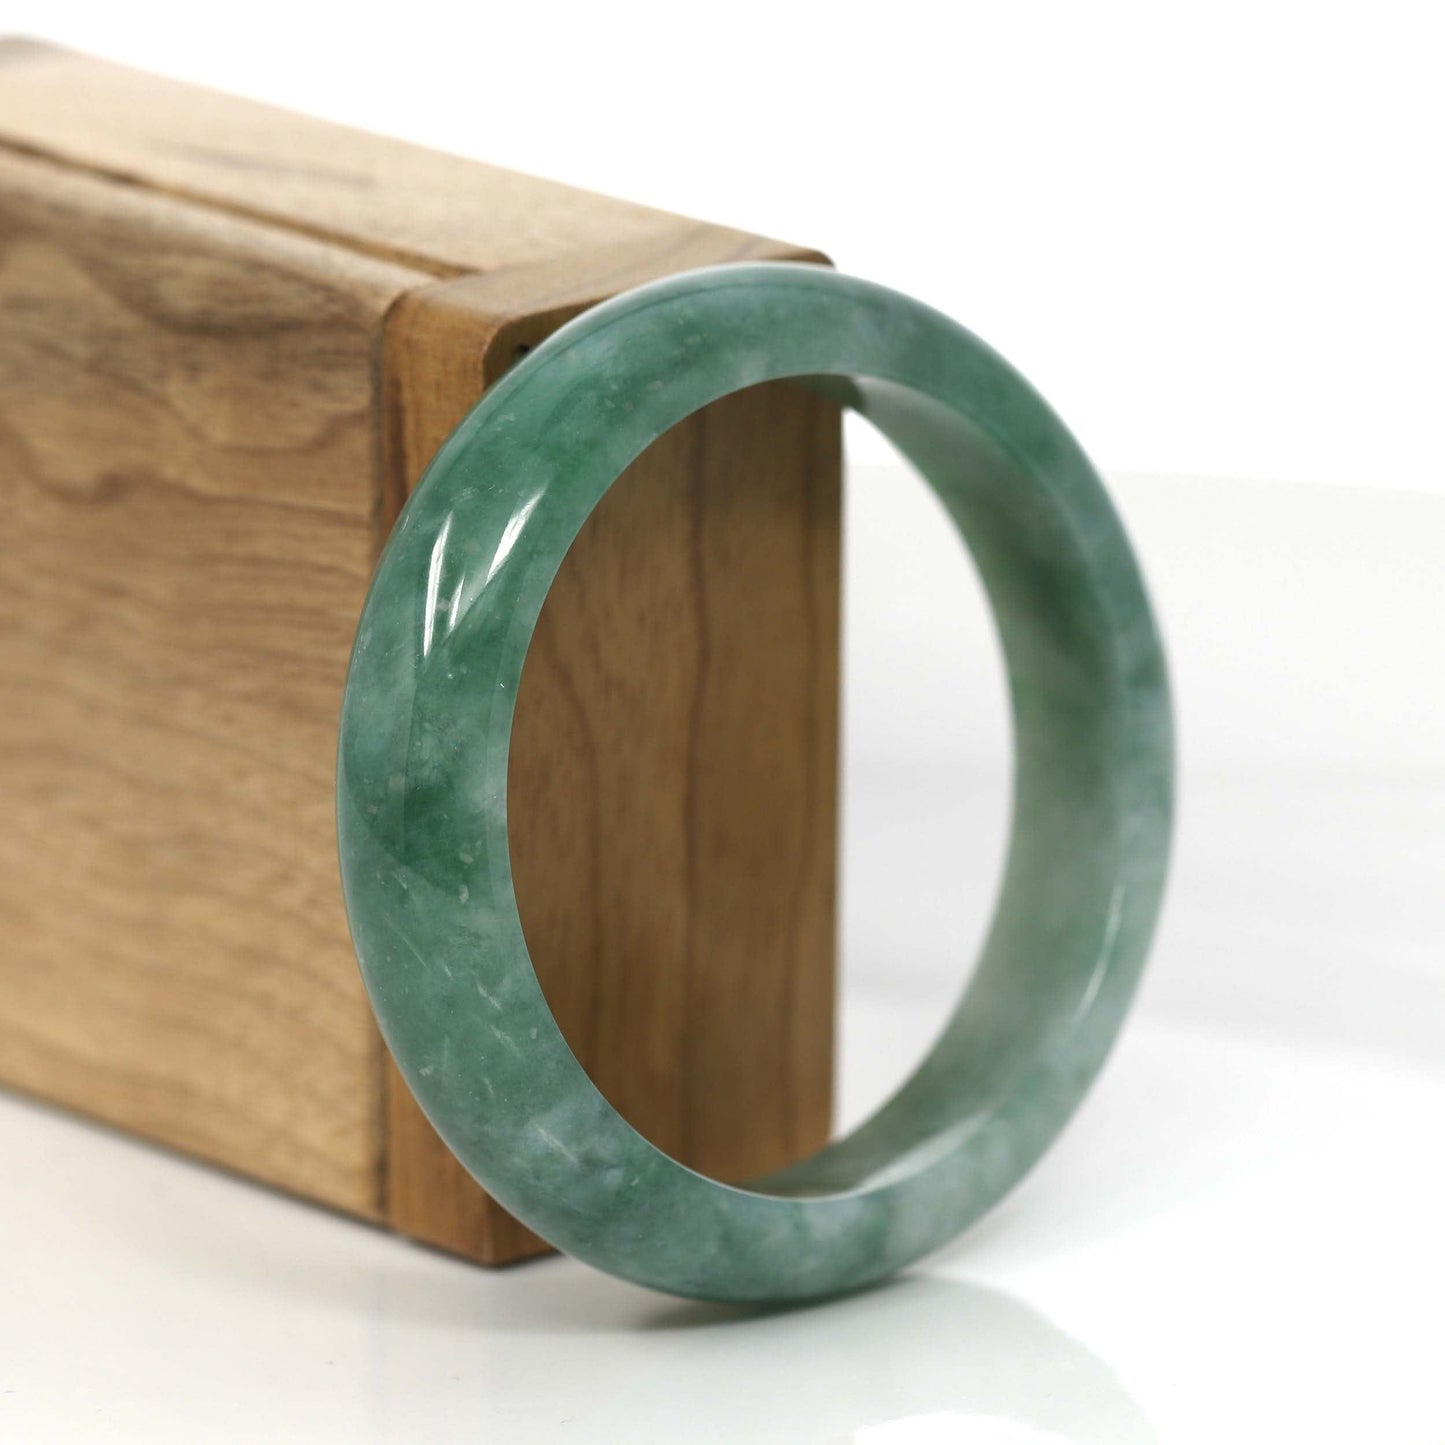 Load image into Gallery viewer, RealJade Co. Jadeite Jade Bangle Bracelet Forest Green Classic Real Jadeite Jade Bangle Bracelet (57.34 mm) #885
